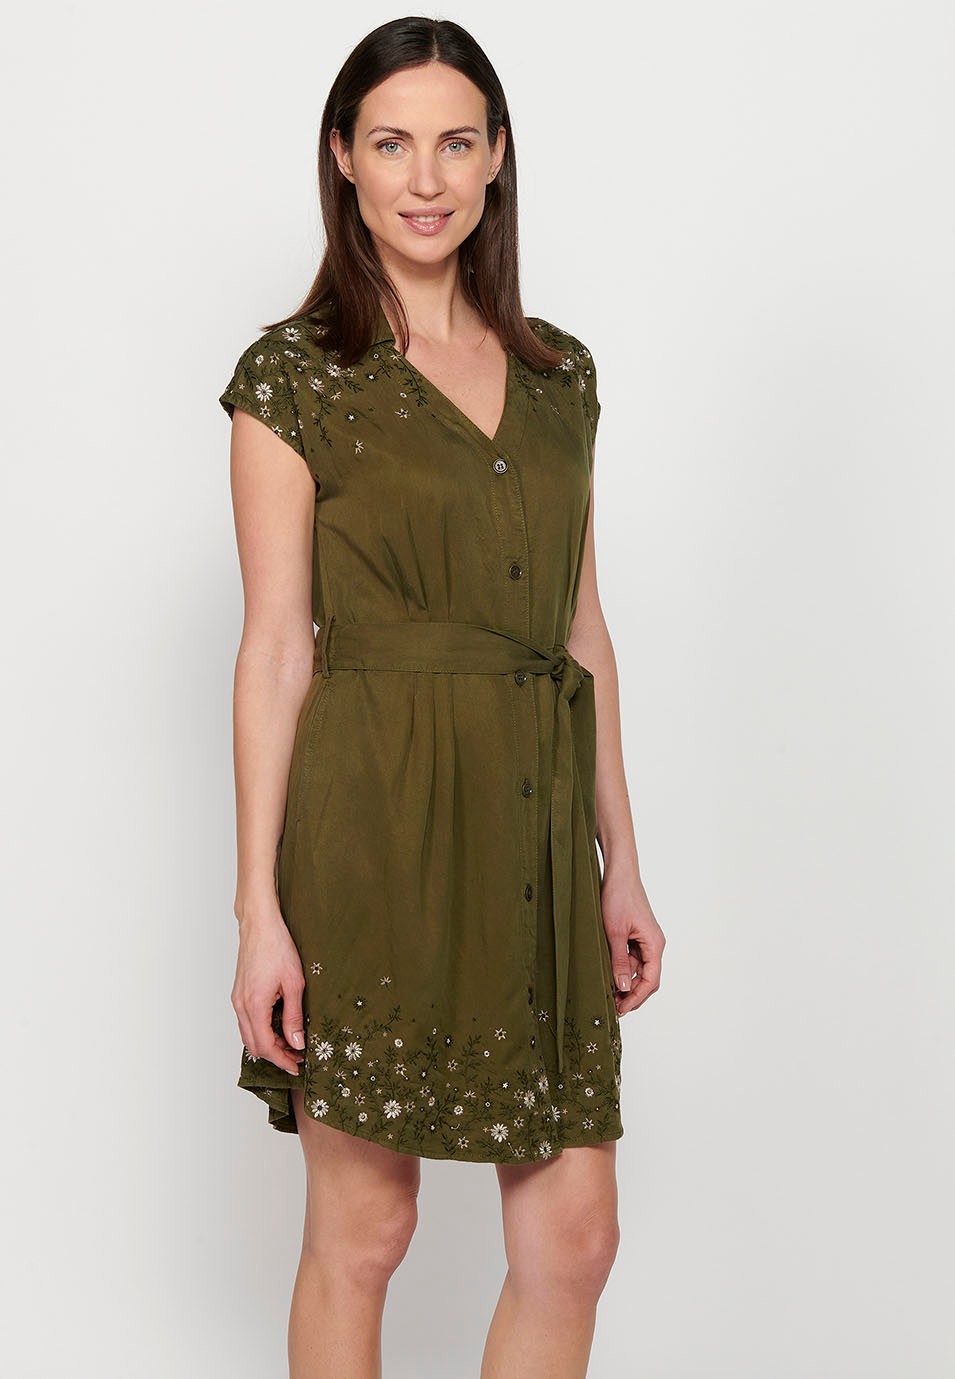 Short-sleeved midi dress with V-neckline and front button closure, fitted at the waist with embroidered details in Khaki color for Women 7